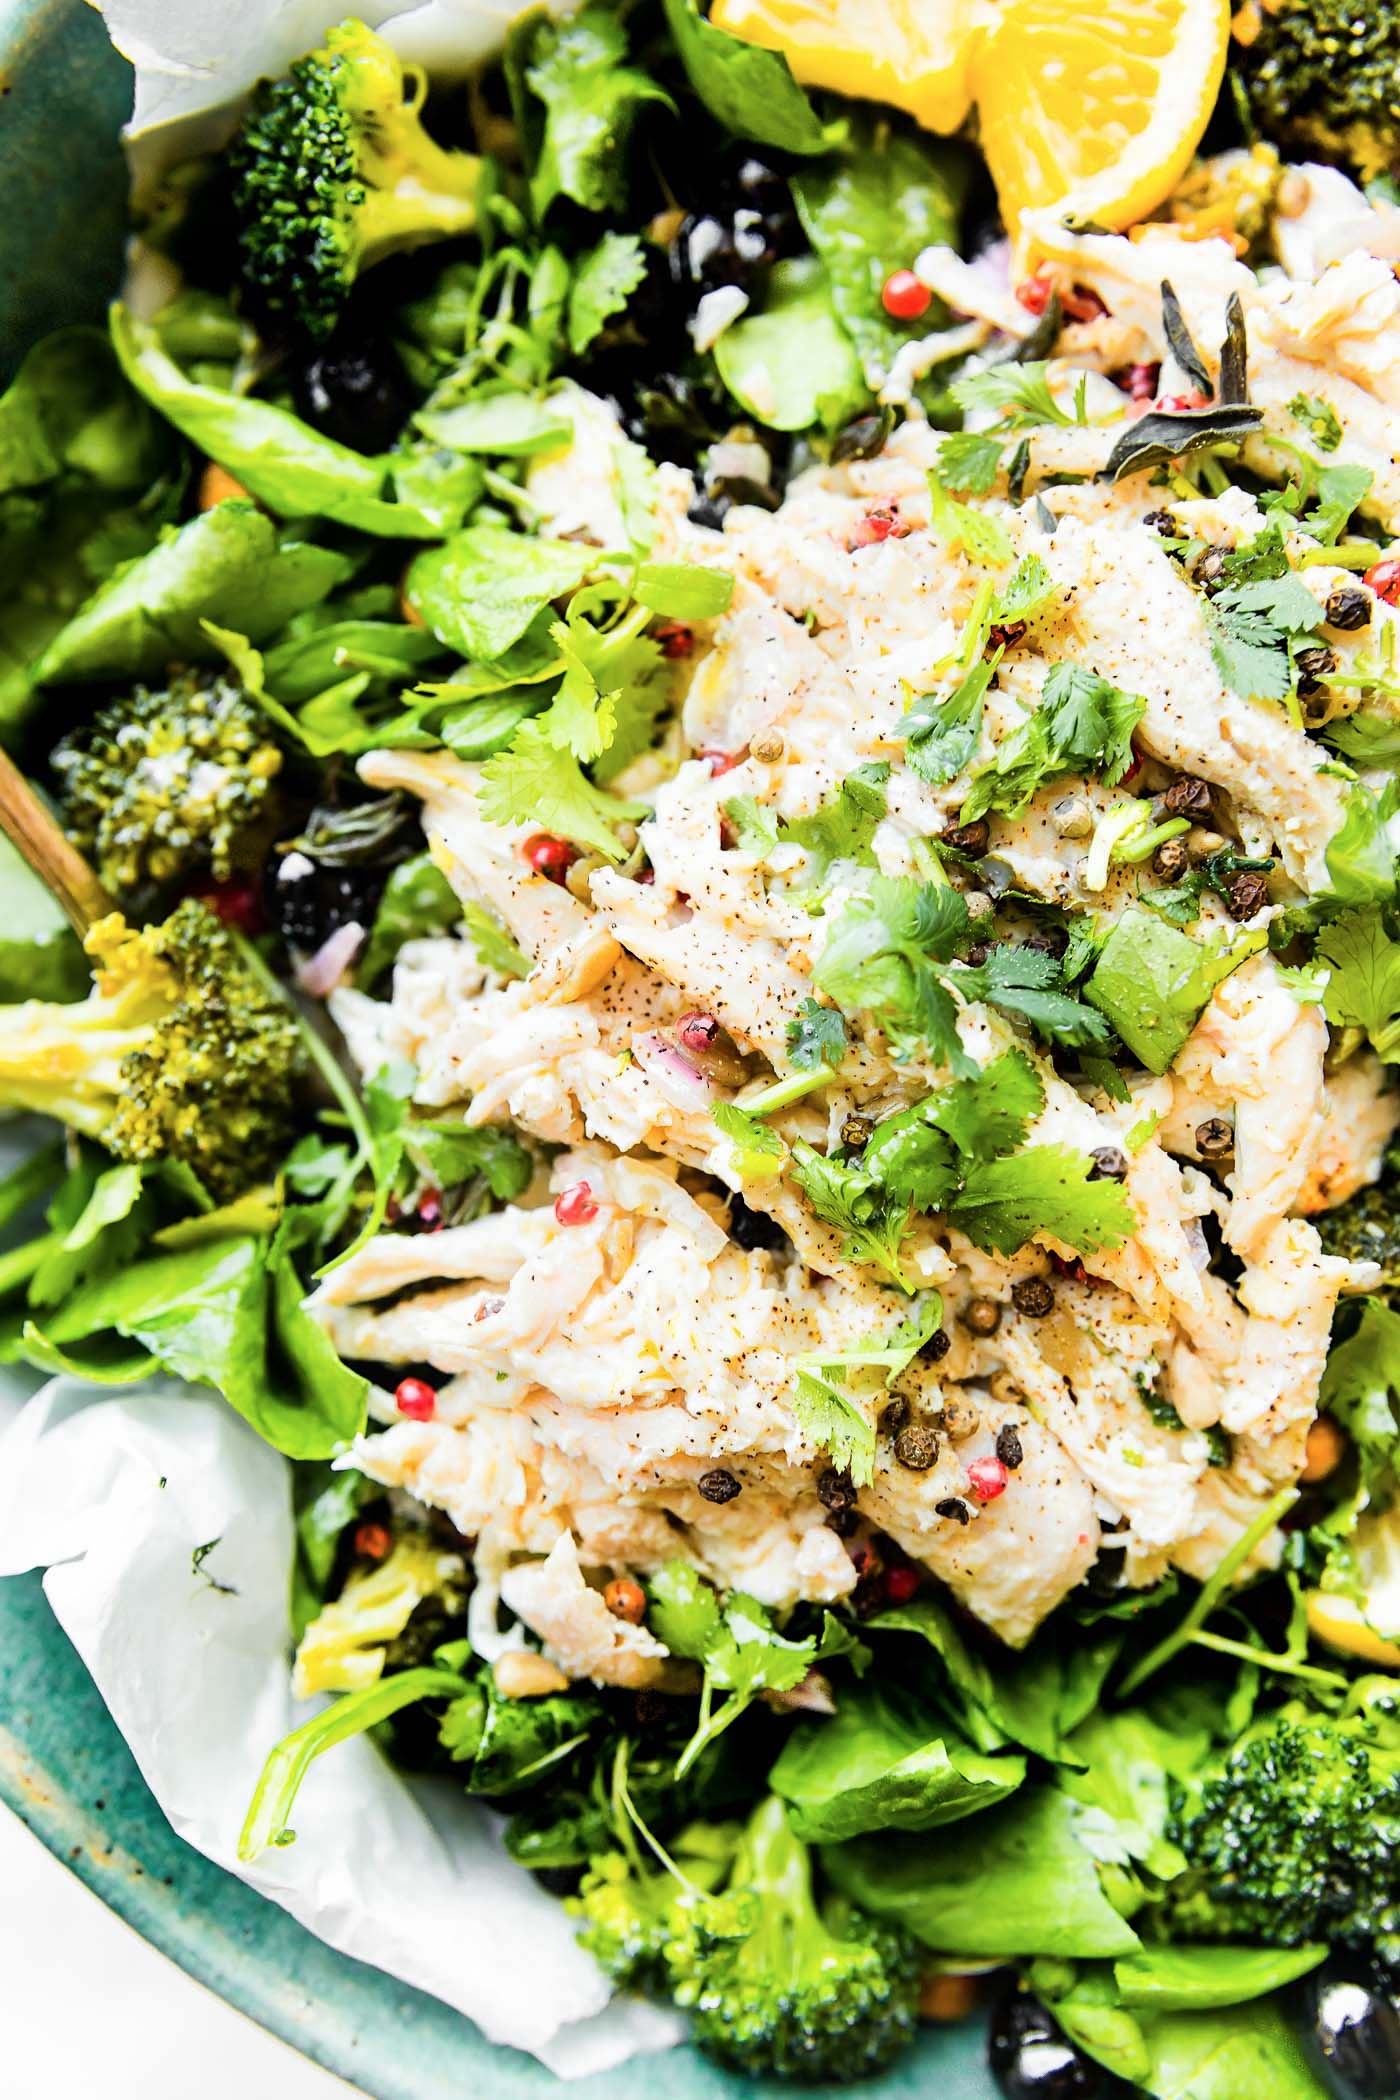 A lightened up Mayo Free Chicken Salad! A chicken salad bowl that's perfect for a healthy meal or side dish. Spinach, roasted broccoli, berries, chickpeas, roasted chicken, and herbs tossed in a light yogurt olive oil dressing.